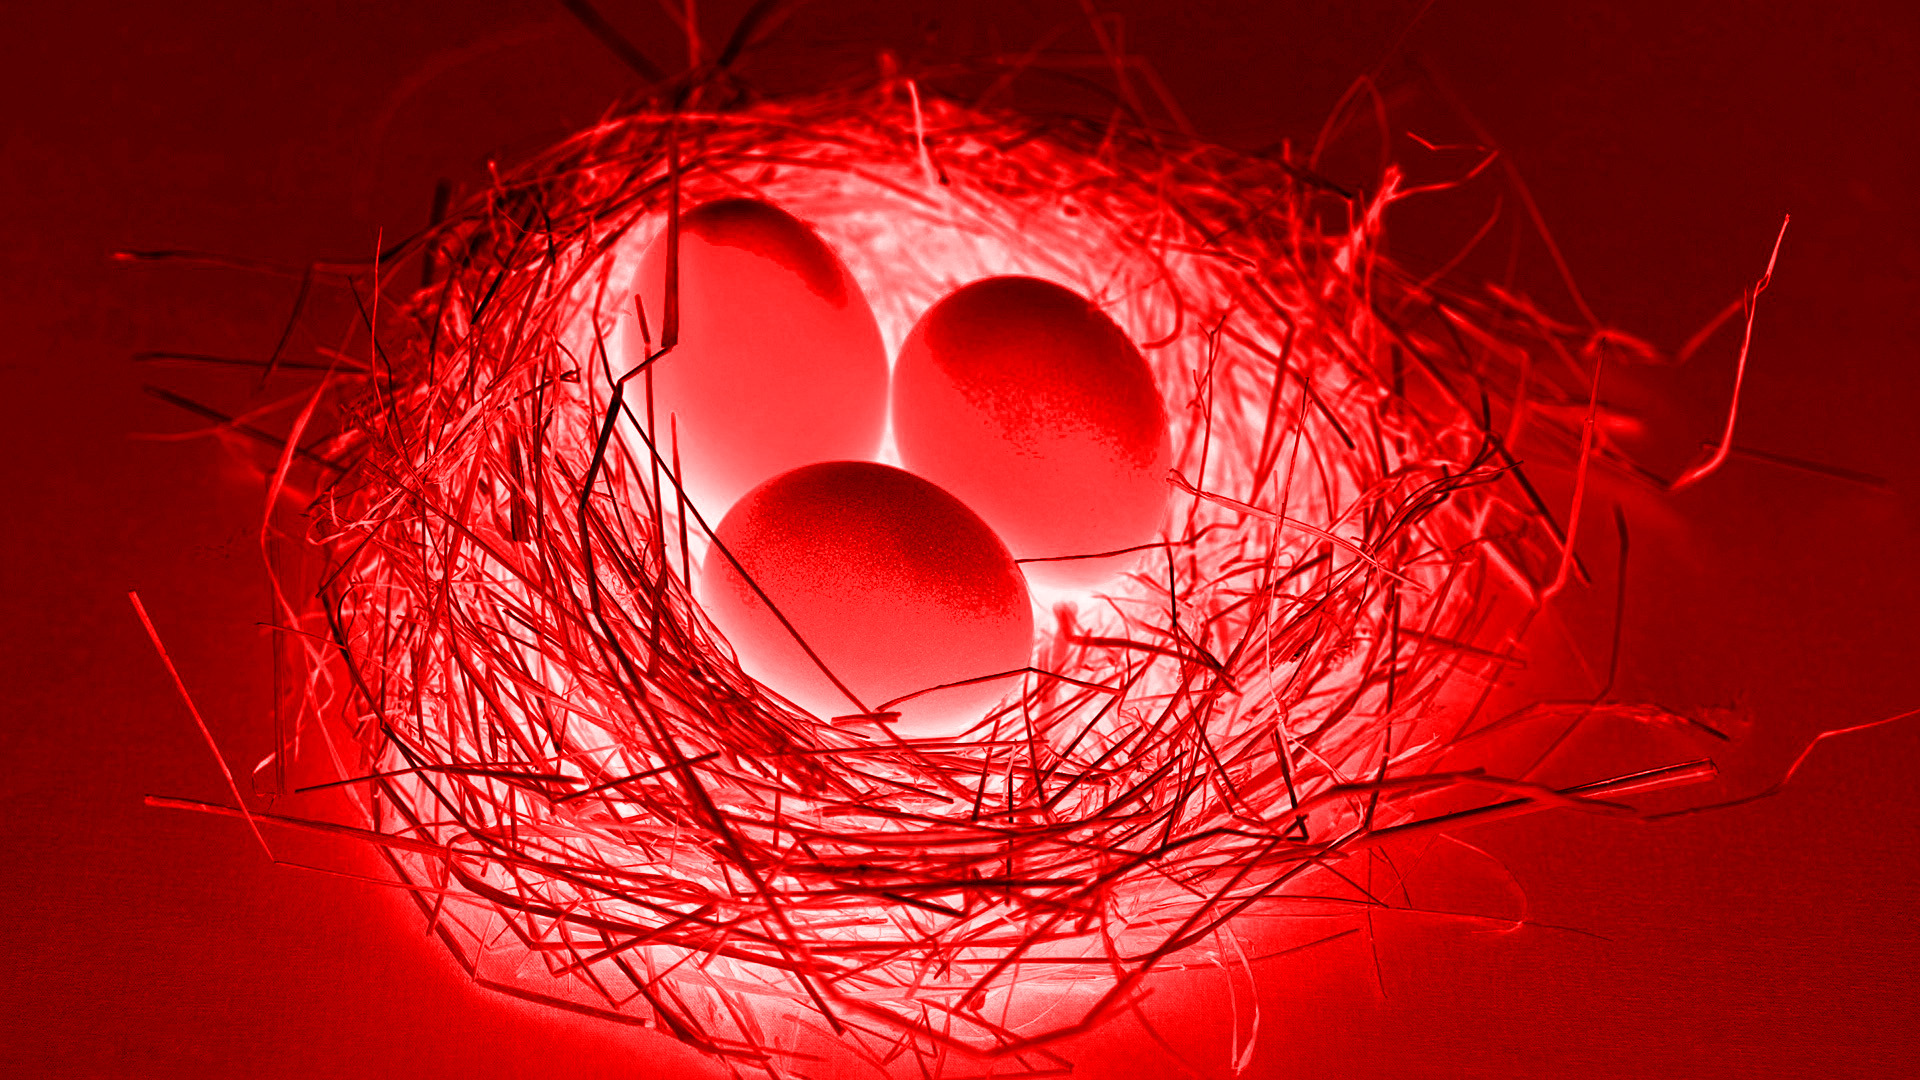 Free HD animal, nest, colors, egg, red